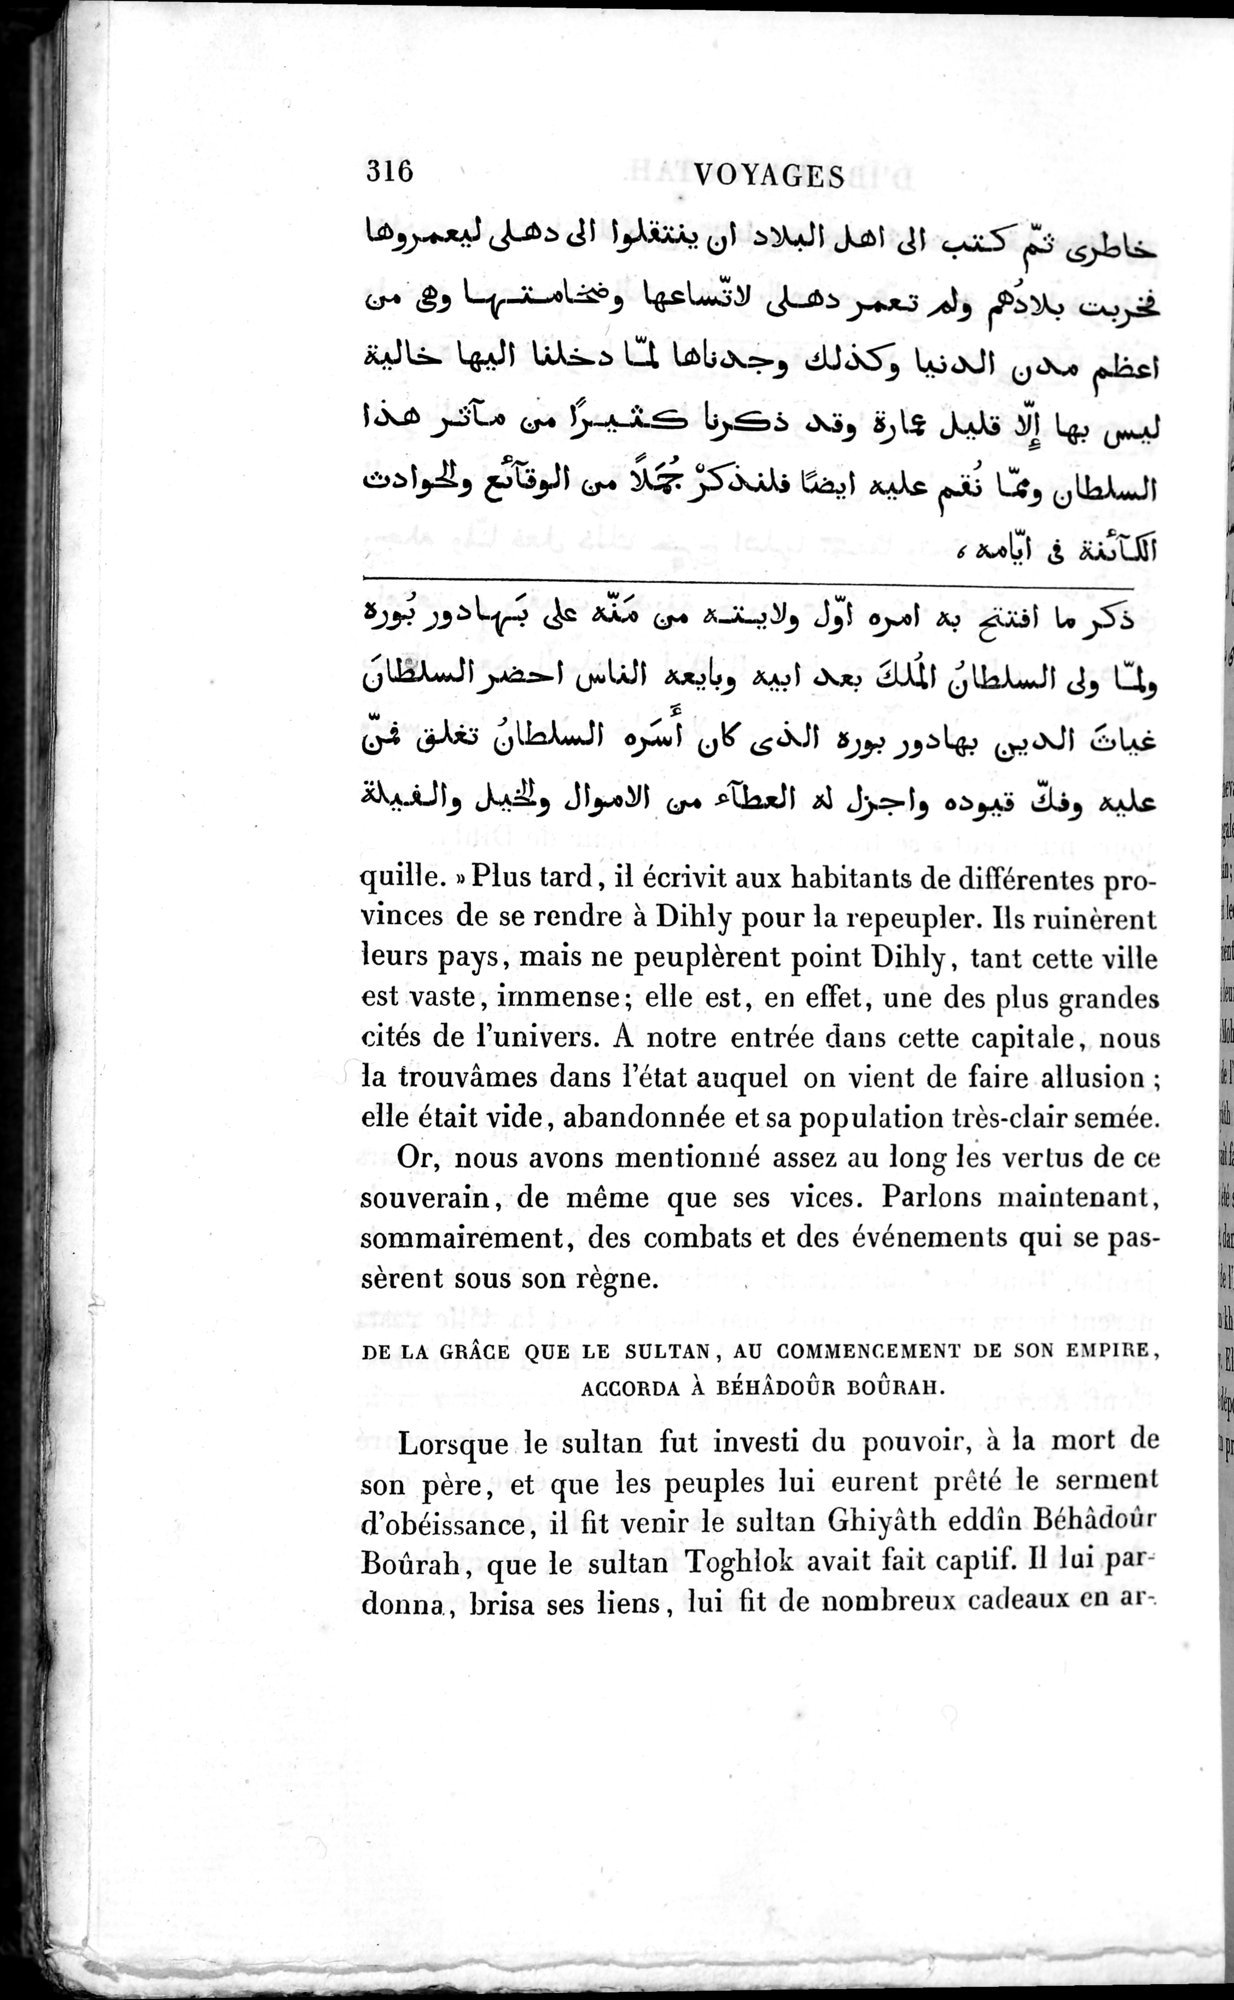 Voyages d'Ibn Batoutah : vol.3 / Page 356 (Grayscale High Resolution Image)